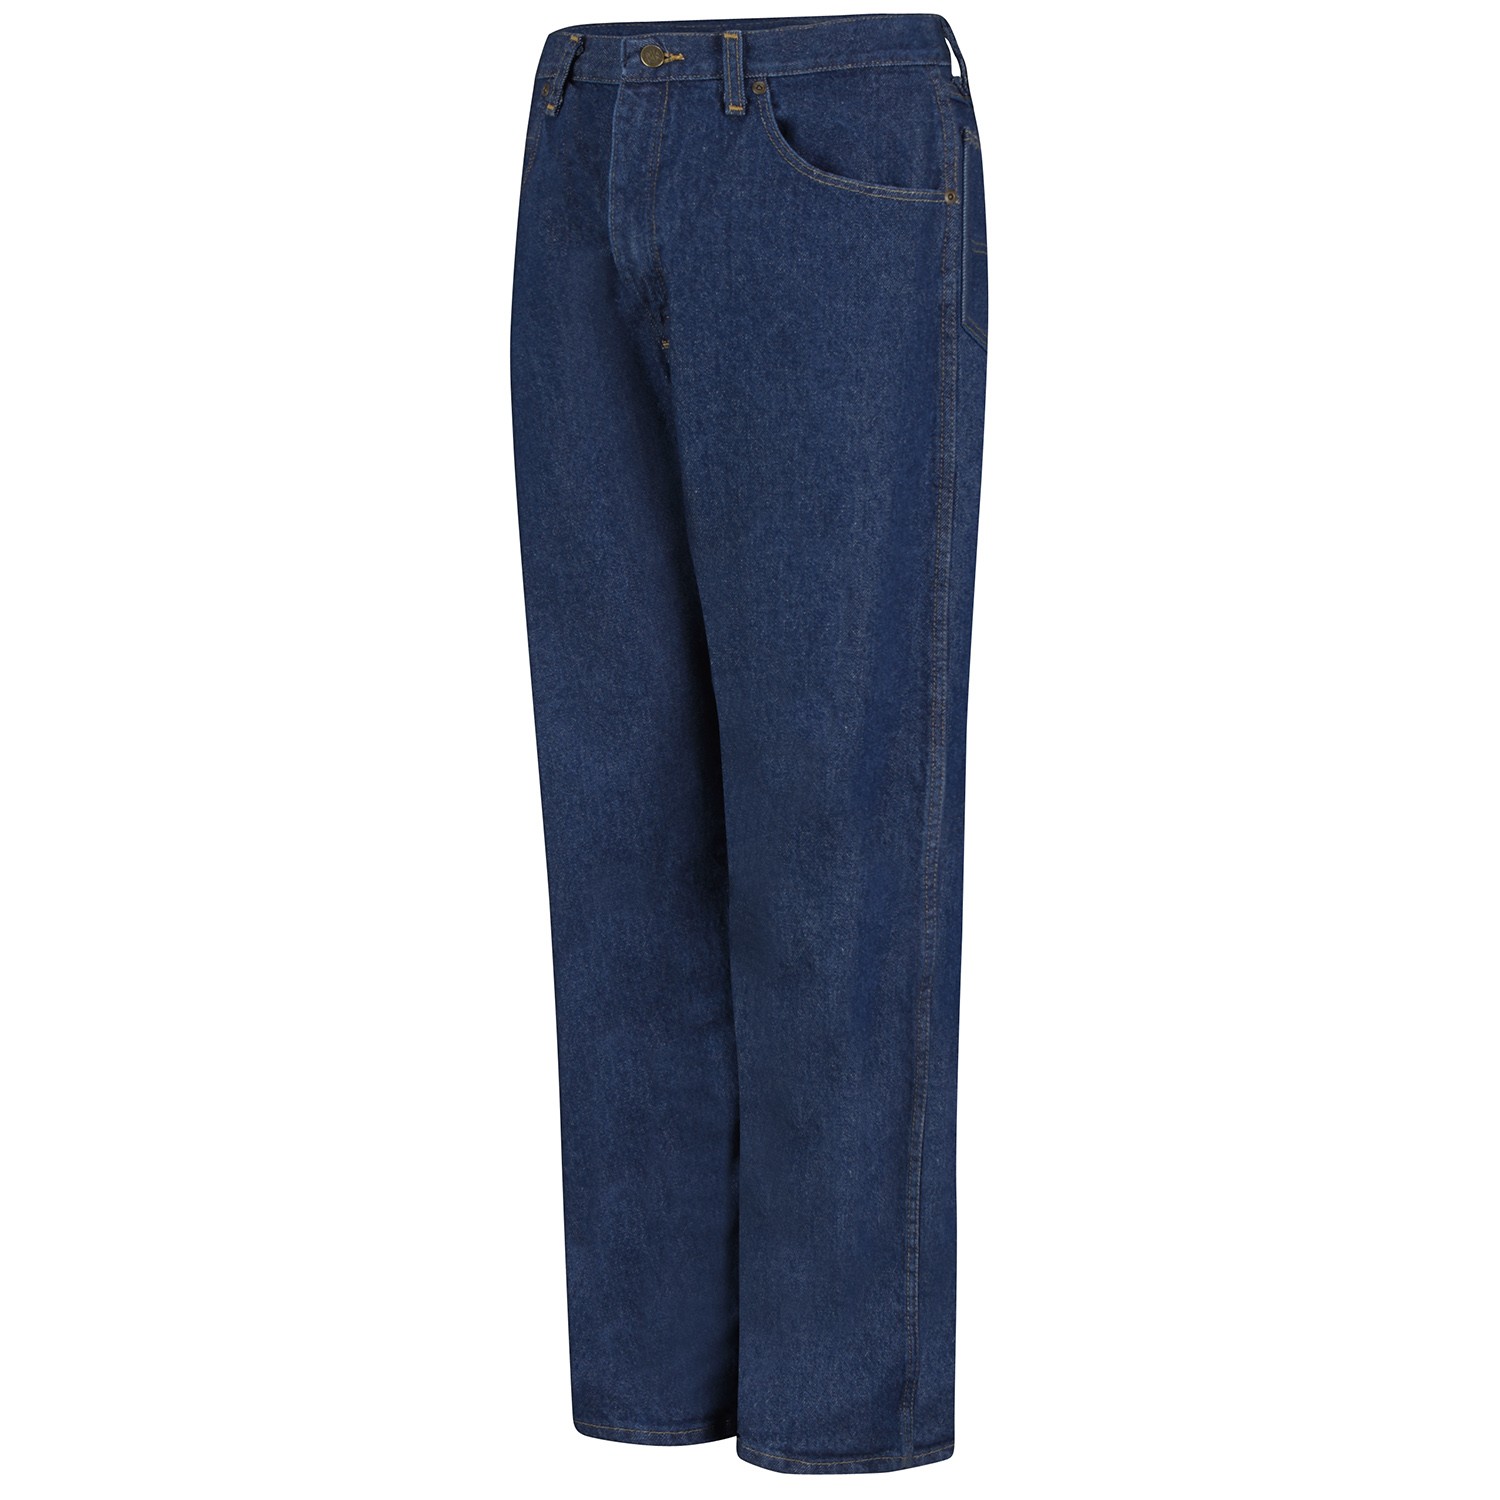 Red Kap PD60 Men's Relaxed Fit Jeans - Prewashed Indigo | FullSource.com